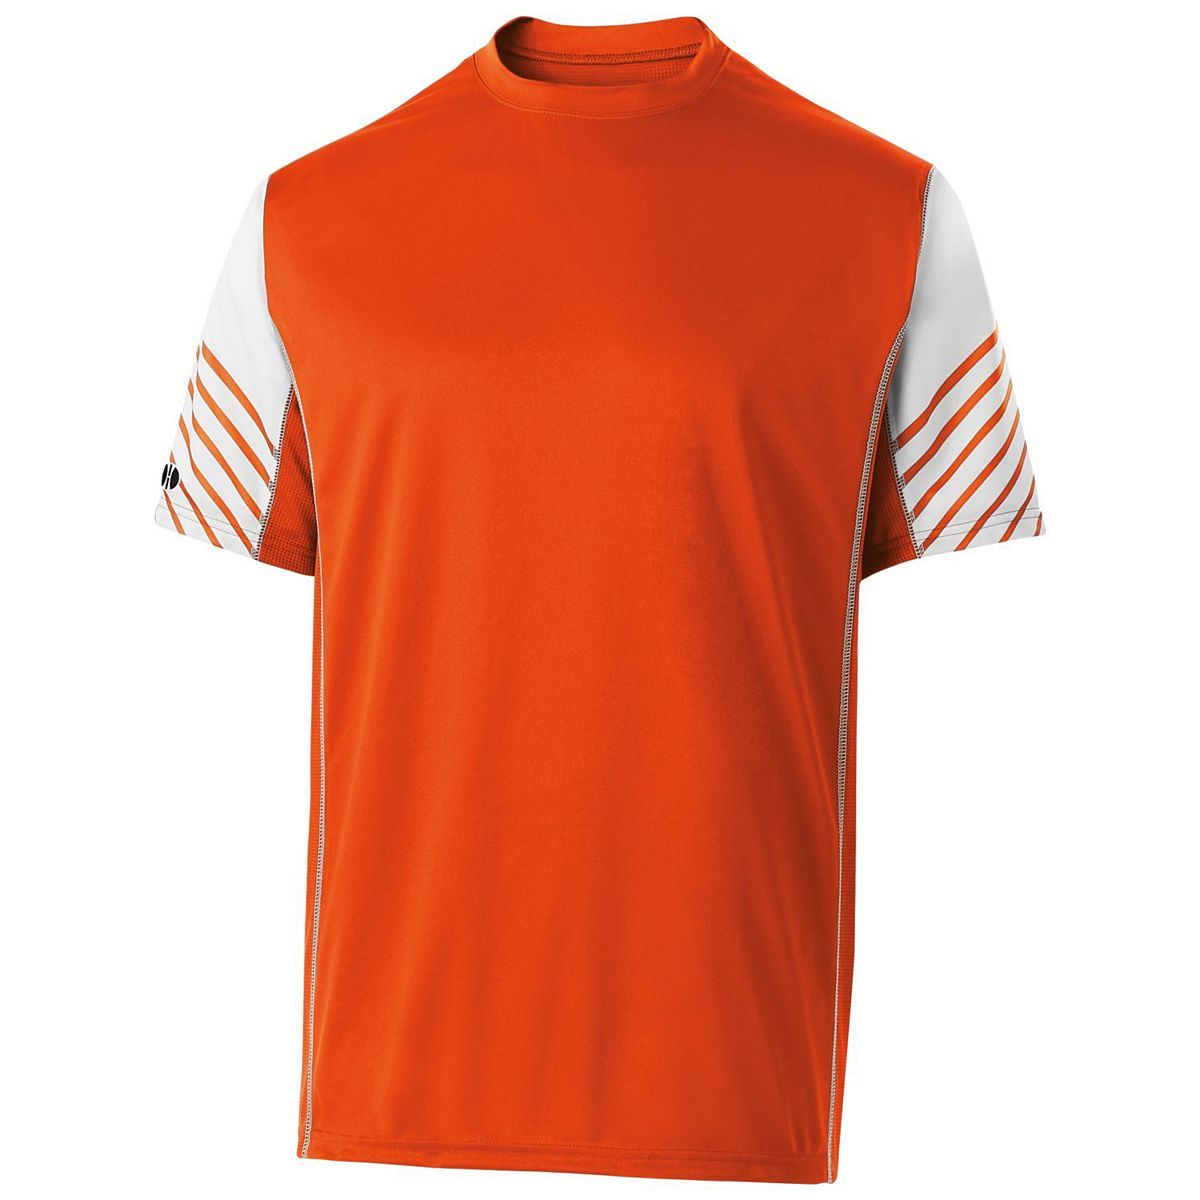 Holloway Youth Arc Short Sleeve Shirt in Orange/White  -Part of the Youth, Holloway, Shirts product lines at KanaleyCreations.com